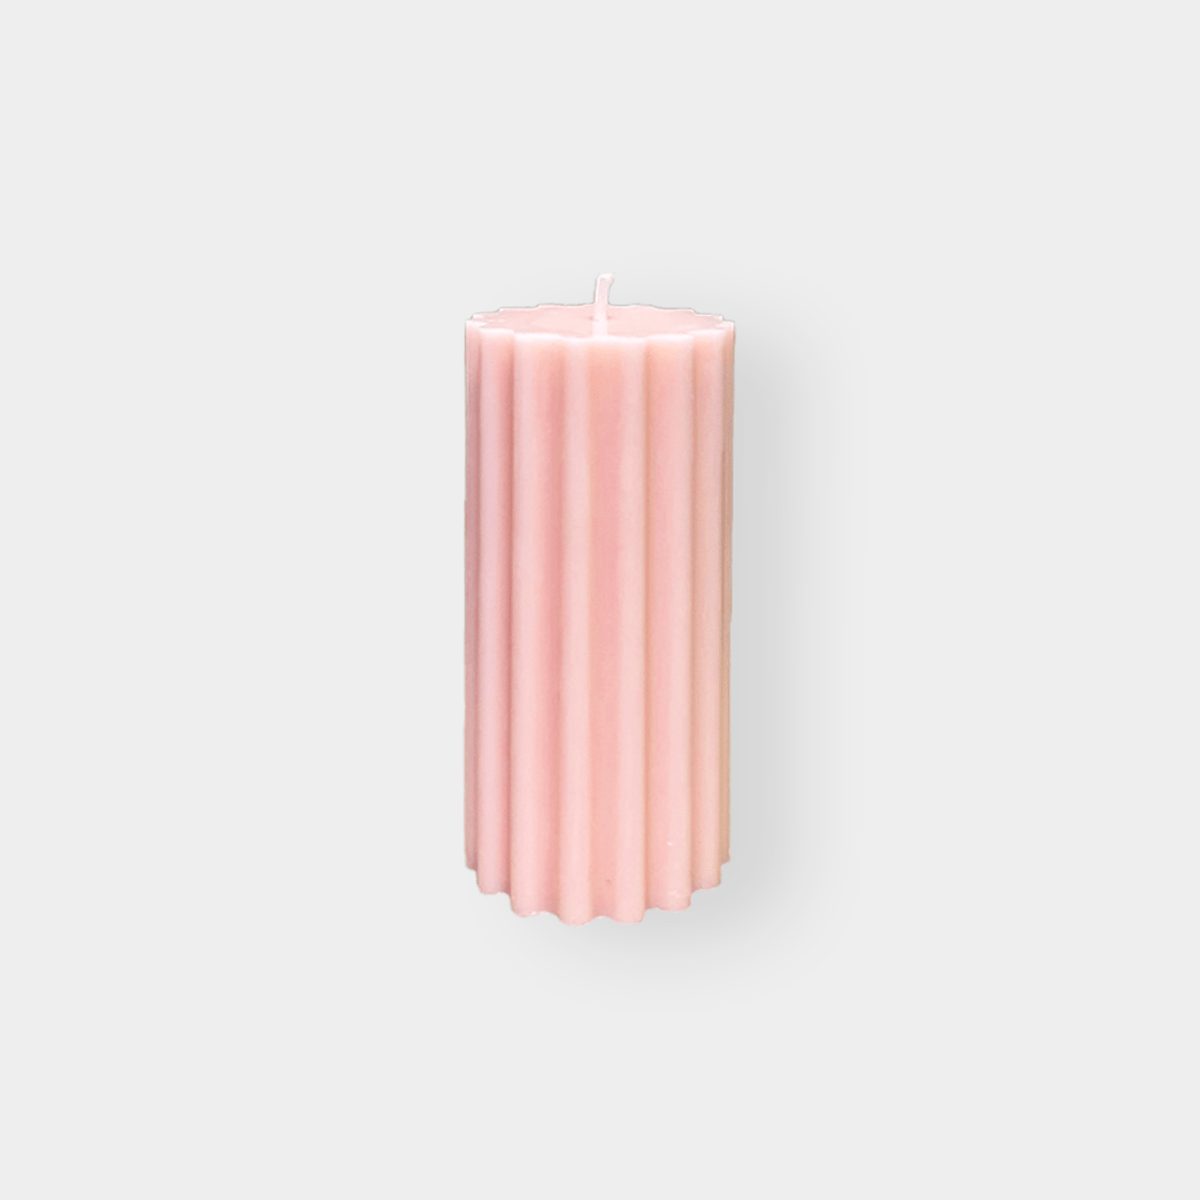 Makes Scents Of It Candles Make Scents of It Fluted Candle, Blush (7796986740985)